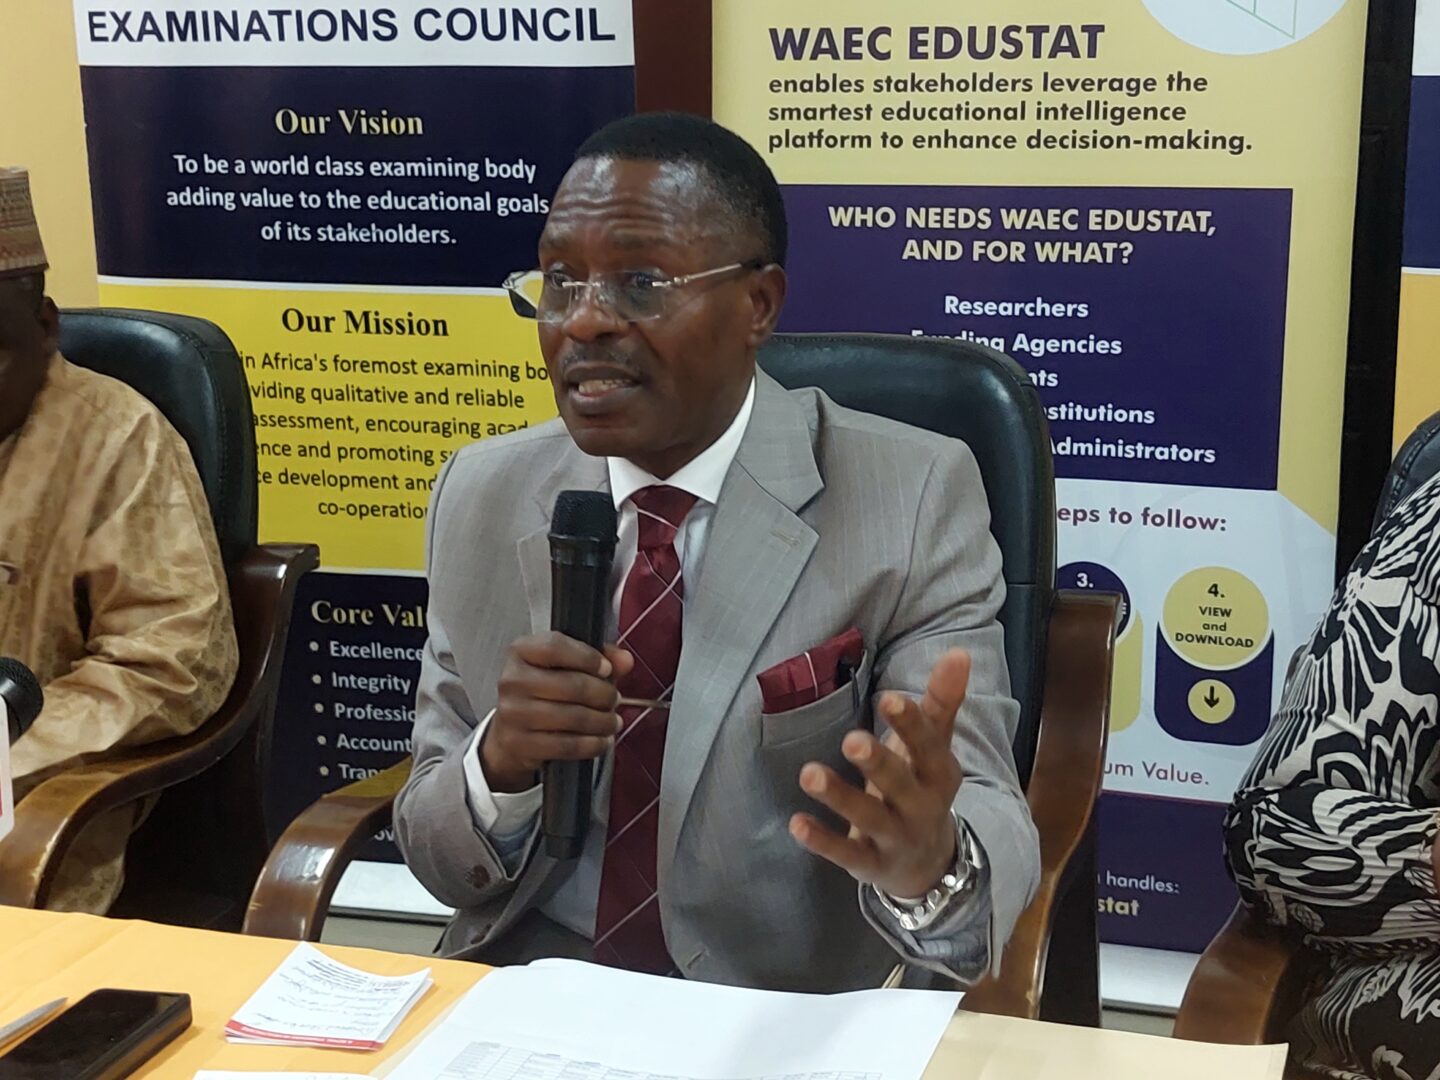 WAEC to introduce CBT for WASSCE